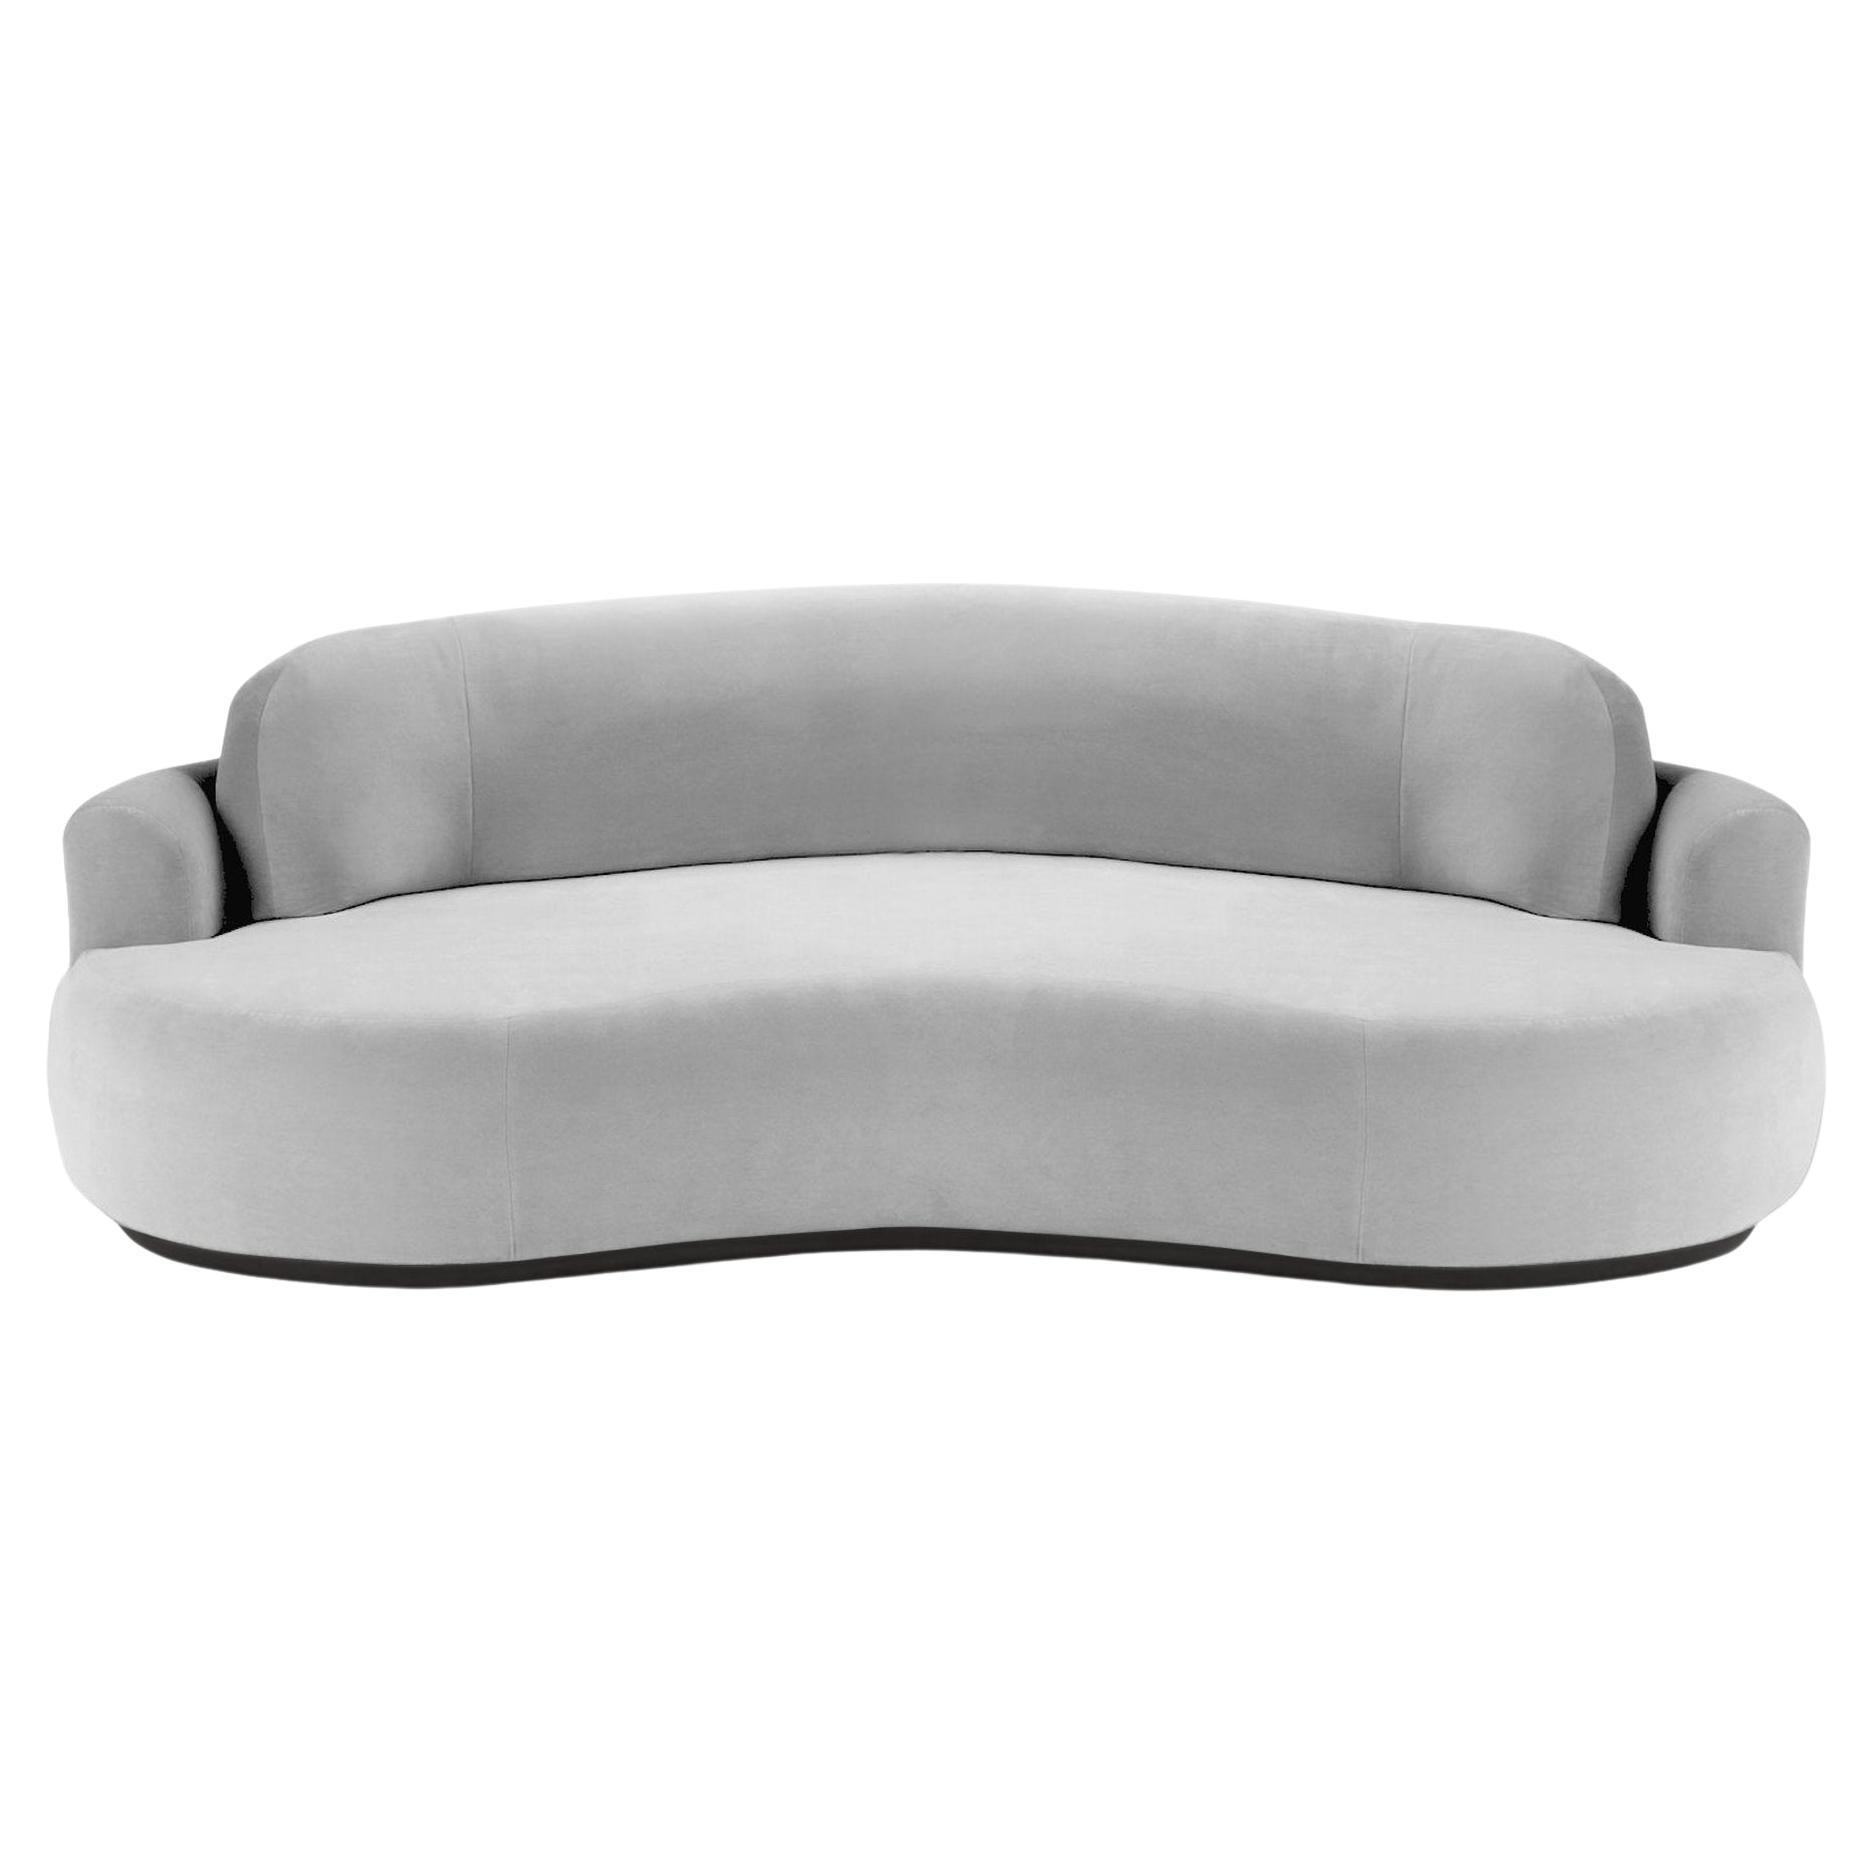 Naked Round Sofa, Medium with Beech Ash-056-5 and Aluminium For Sale